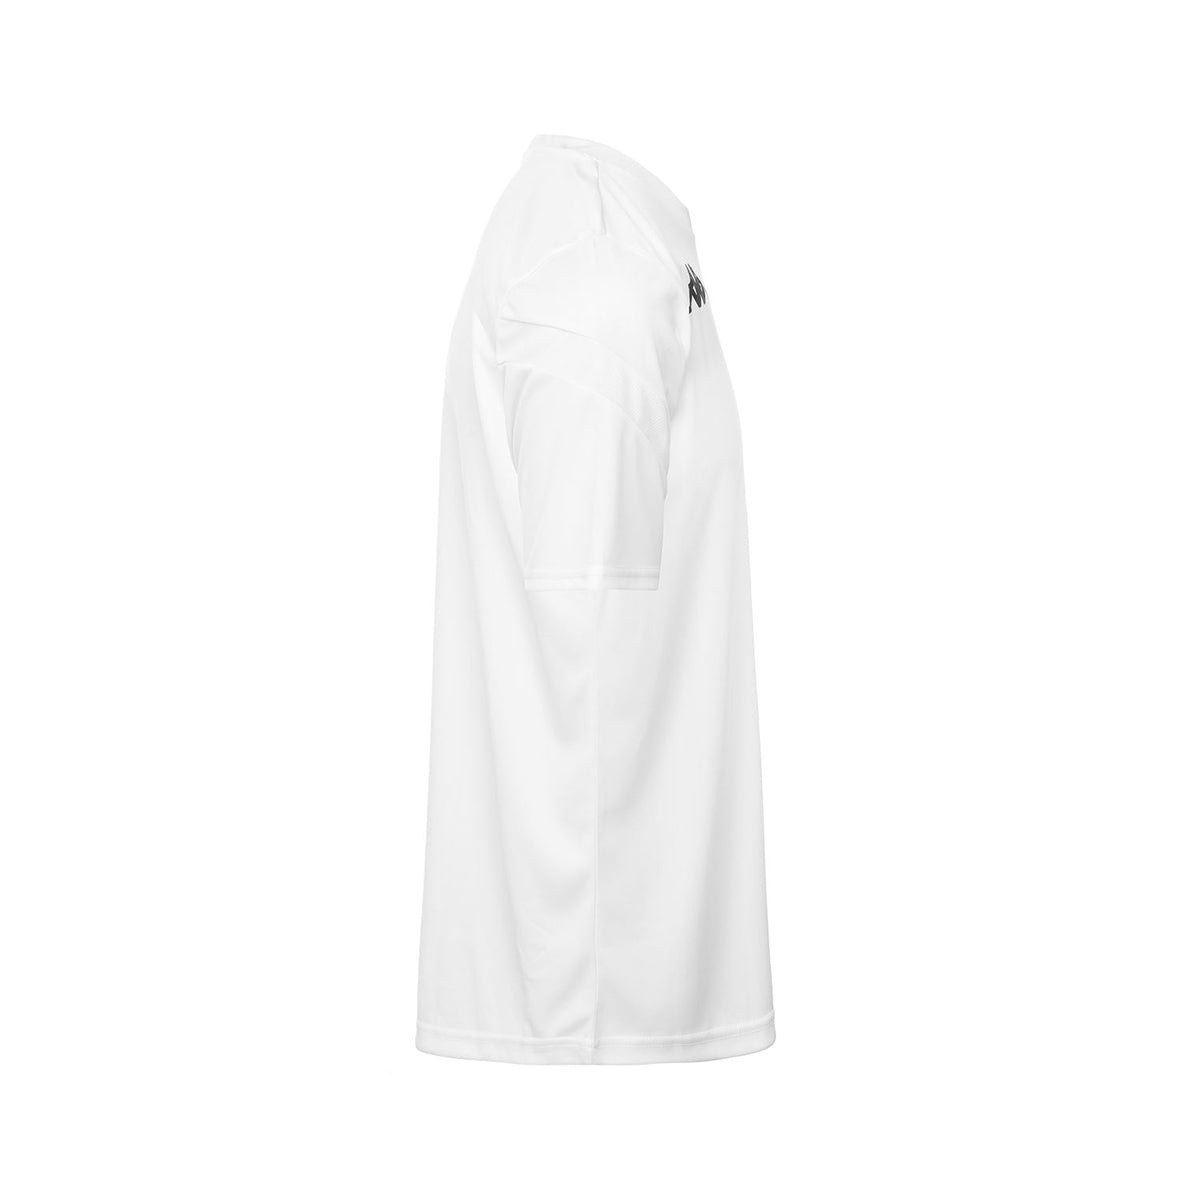 Maillot Dovo Blanc Homme - Image 2